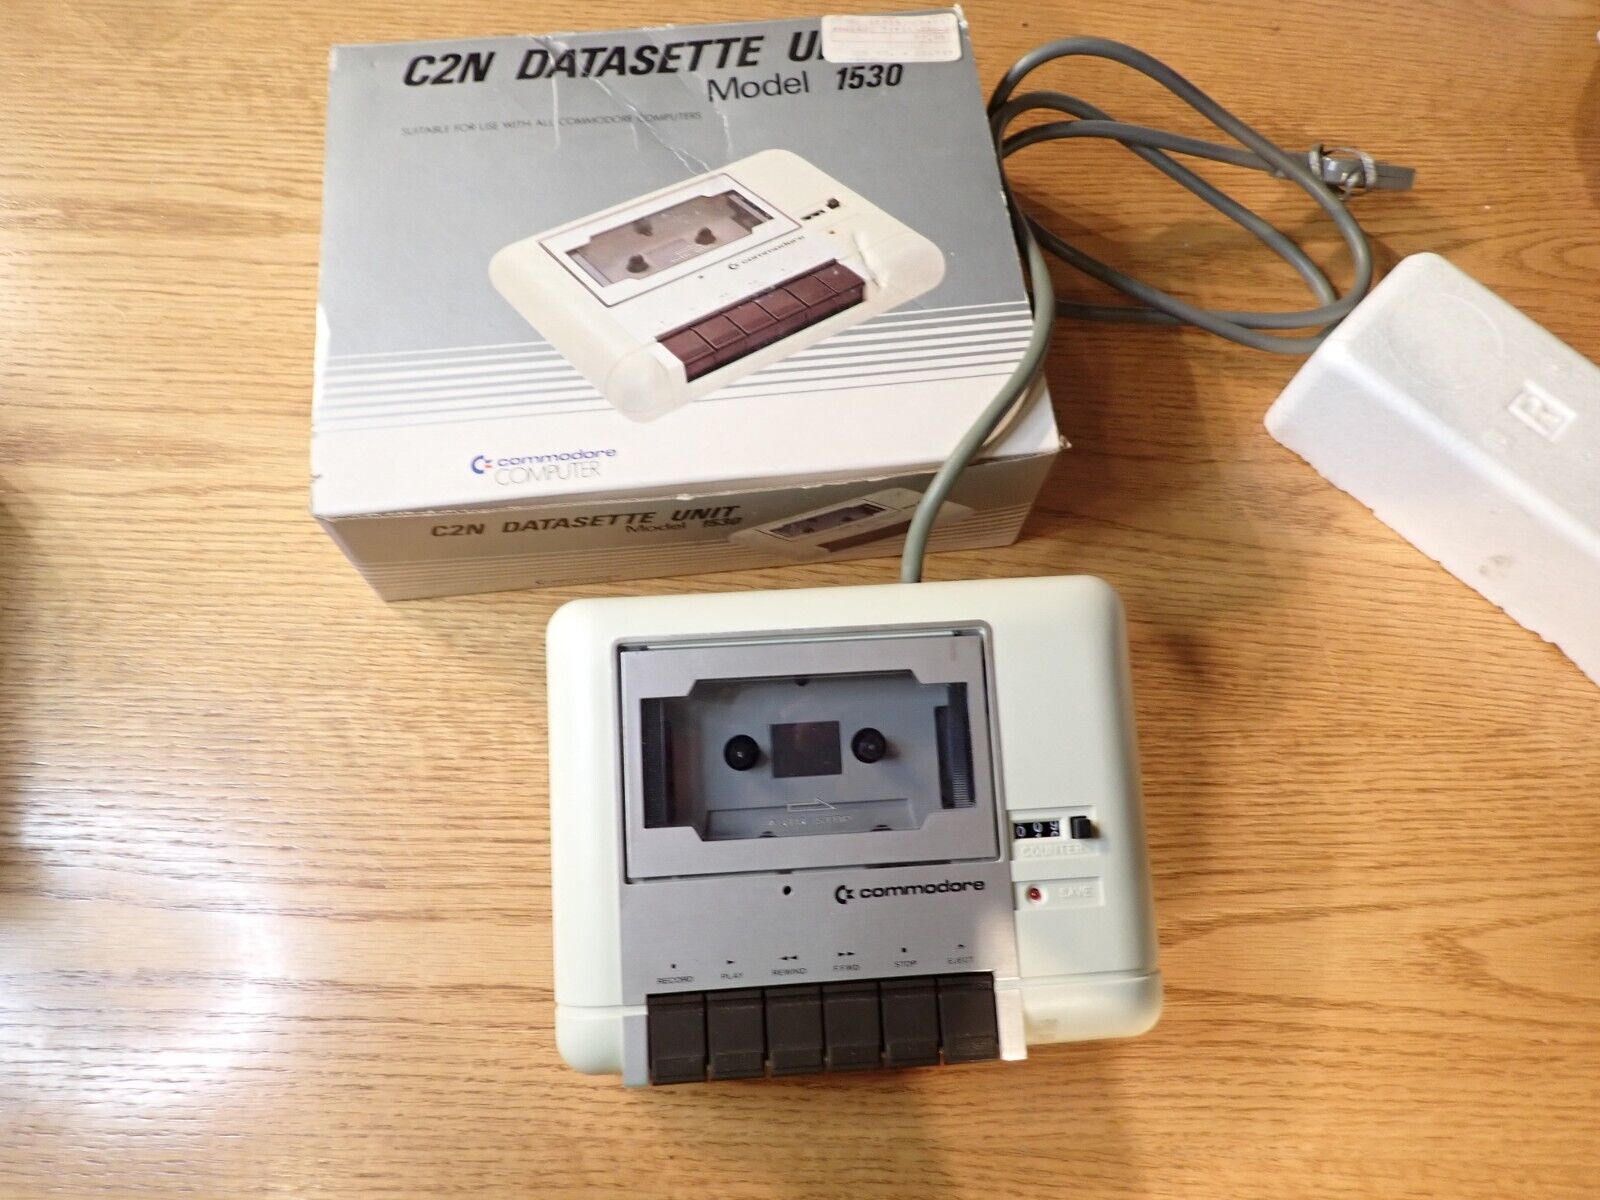 Nice/clean Commodore Computer C2N Datasette Unit Model 1530 Cassette in box